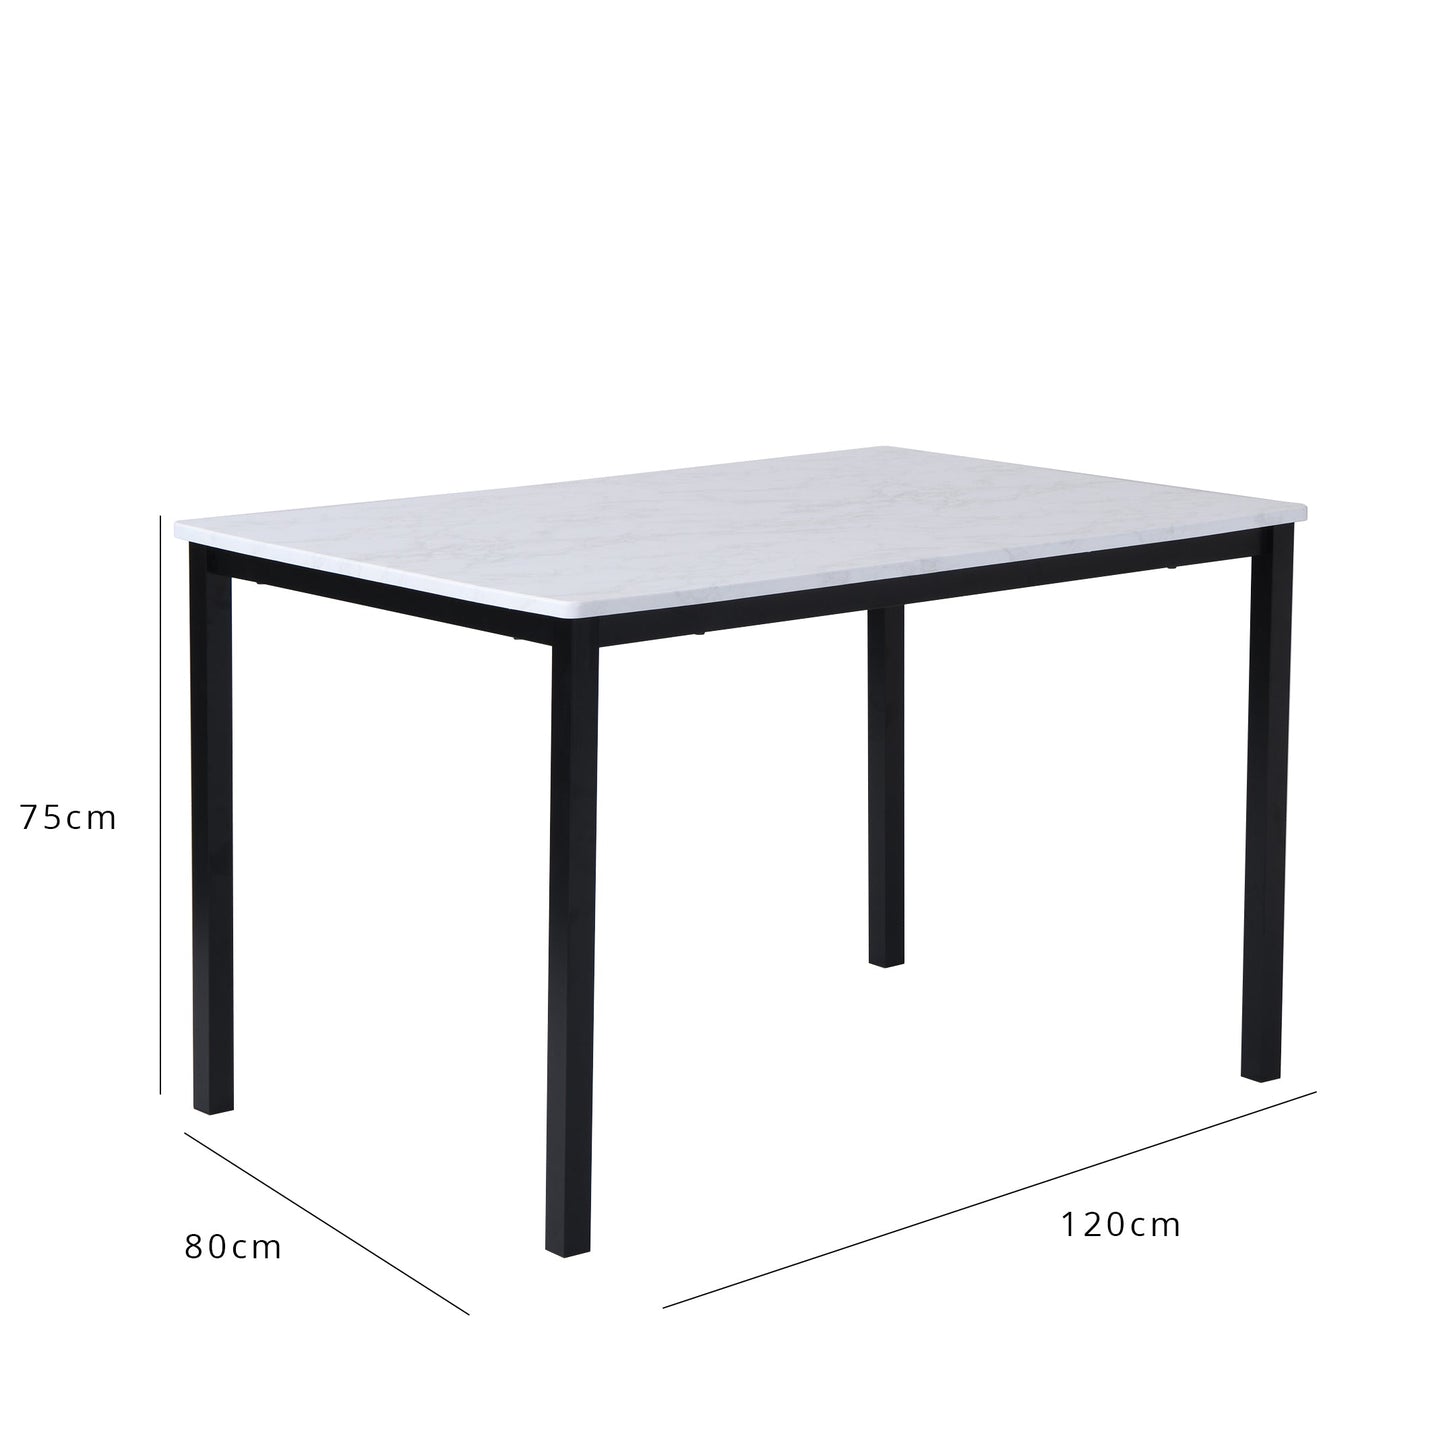 Milo dining table - 4 seater - marble effect and black - Laura James